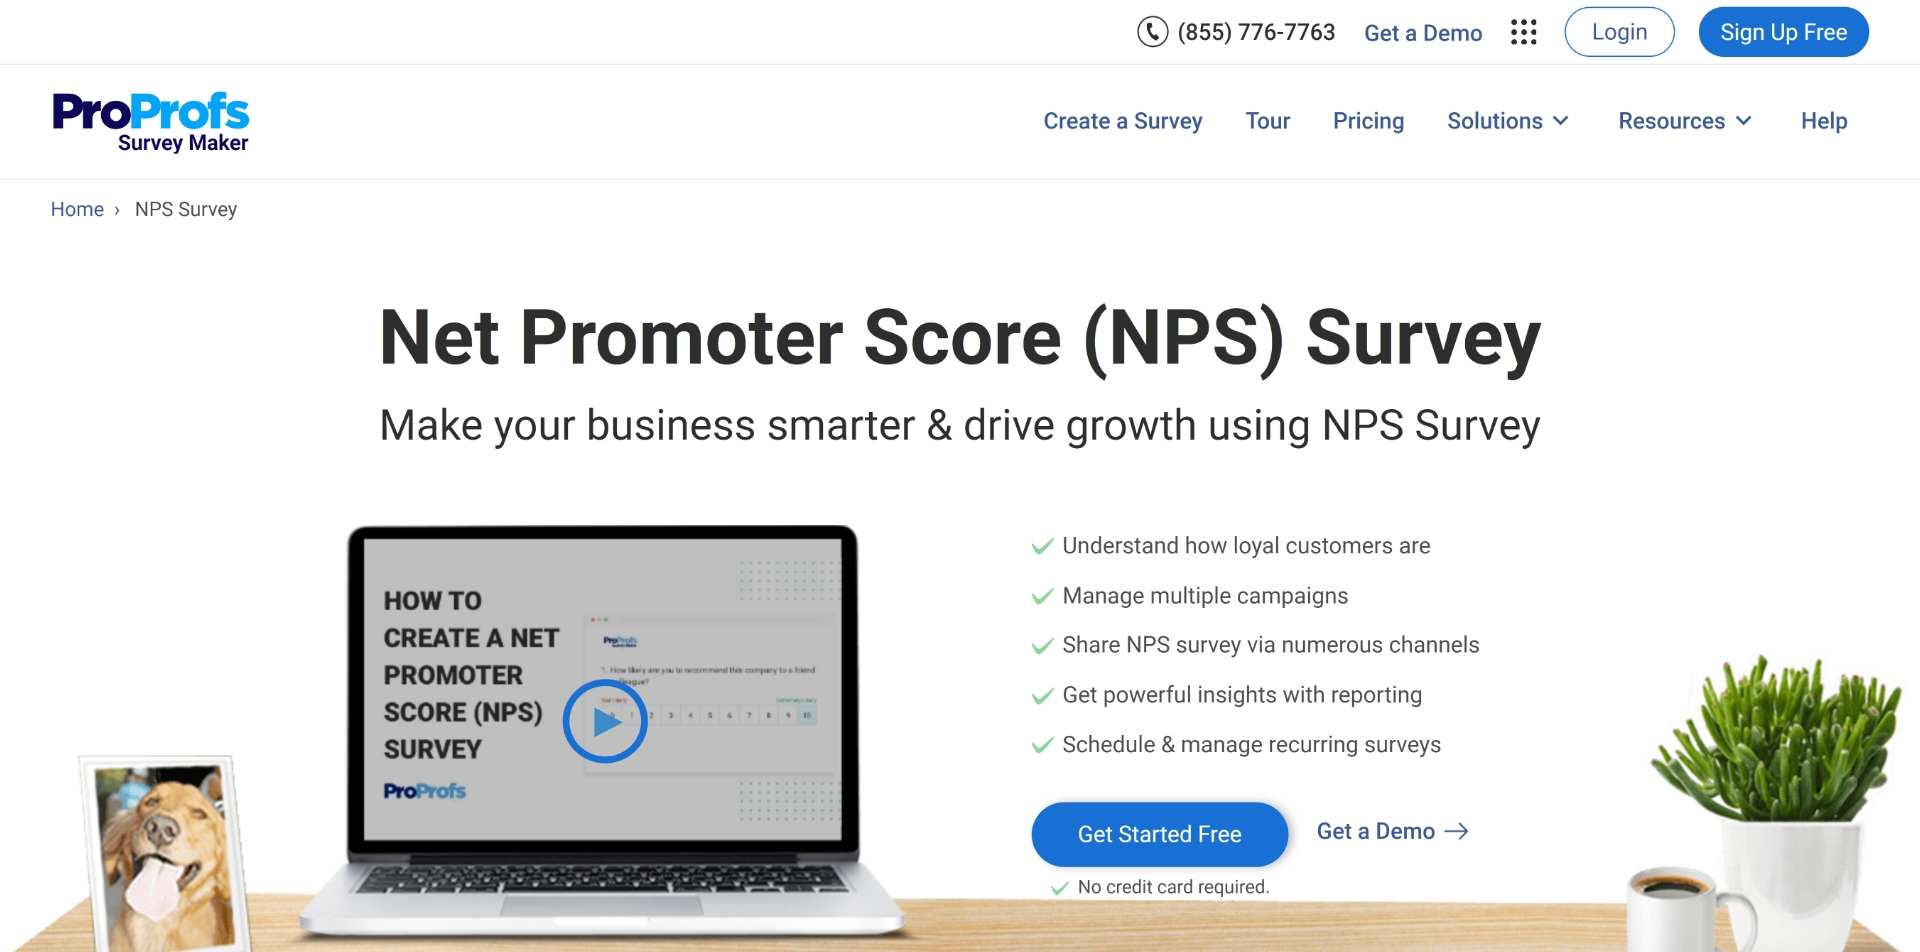 Net Promoter Score The Ultimate NPS Survey Guide for Growth